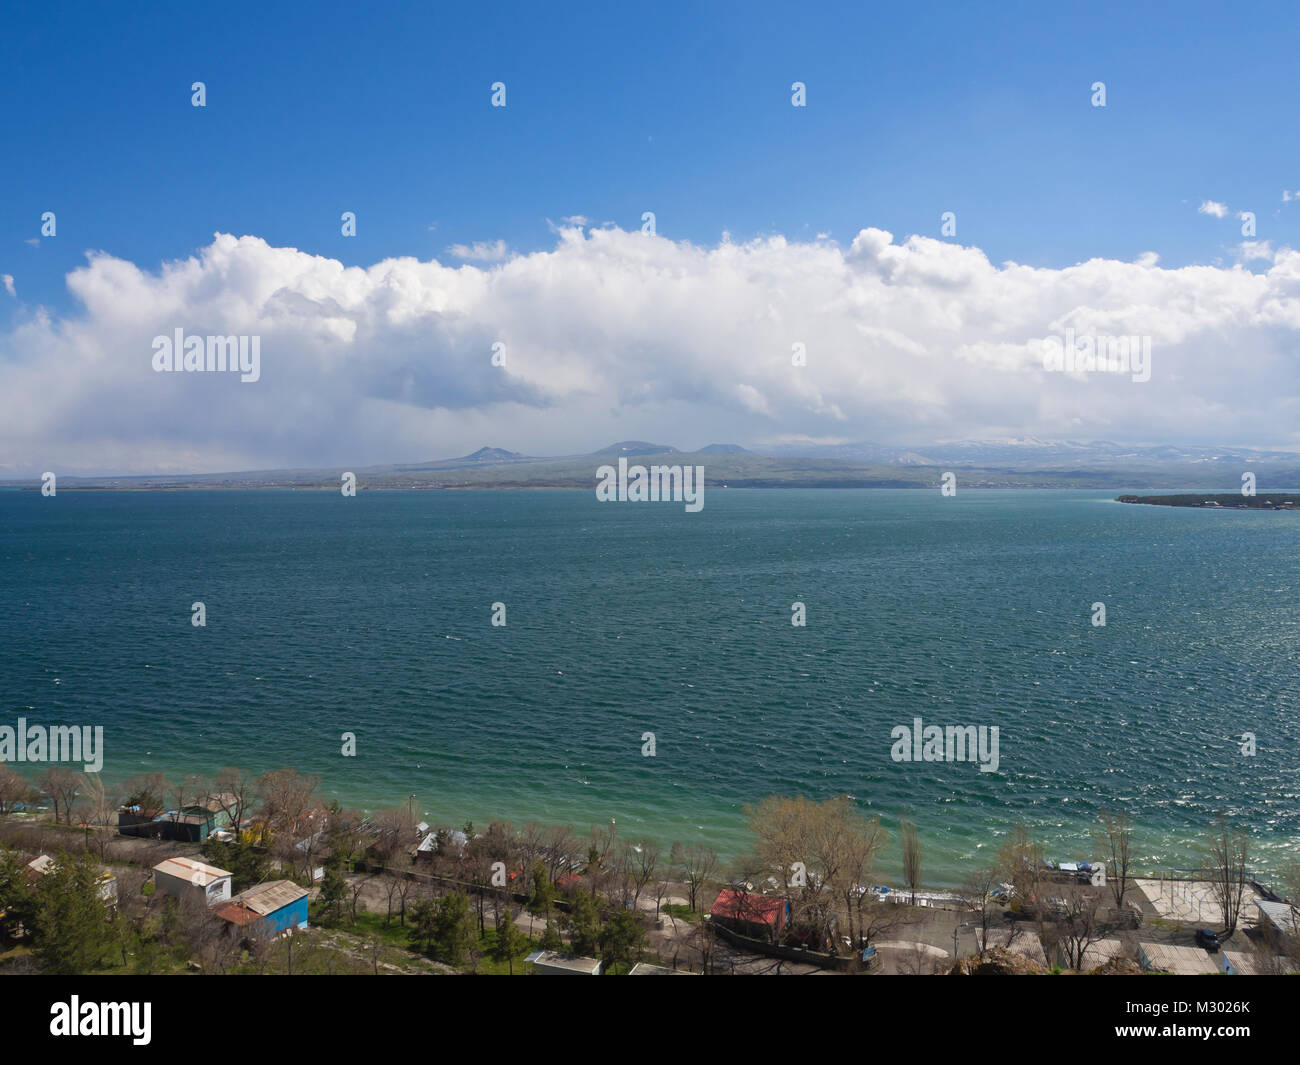 Lake Sevan in Armenia at an altitude of altitude of 1,900 m, the largest fresh water reserve in the area, panorama view, shoreline, trees and cabins Stock Photo